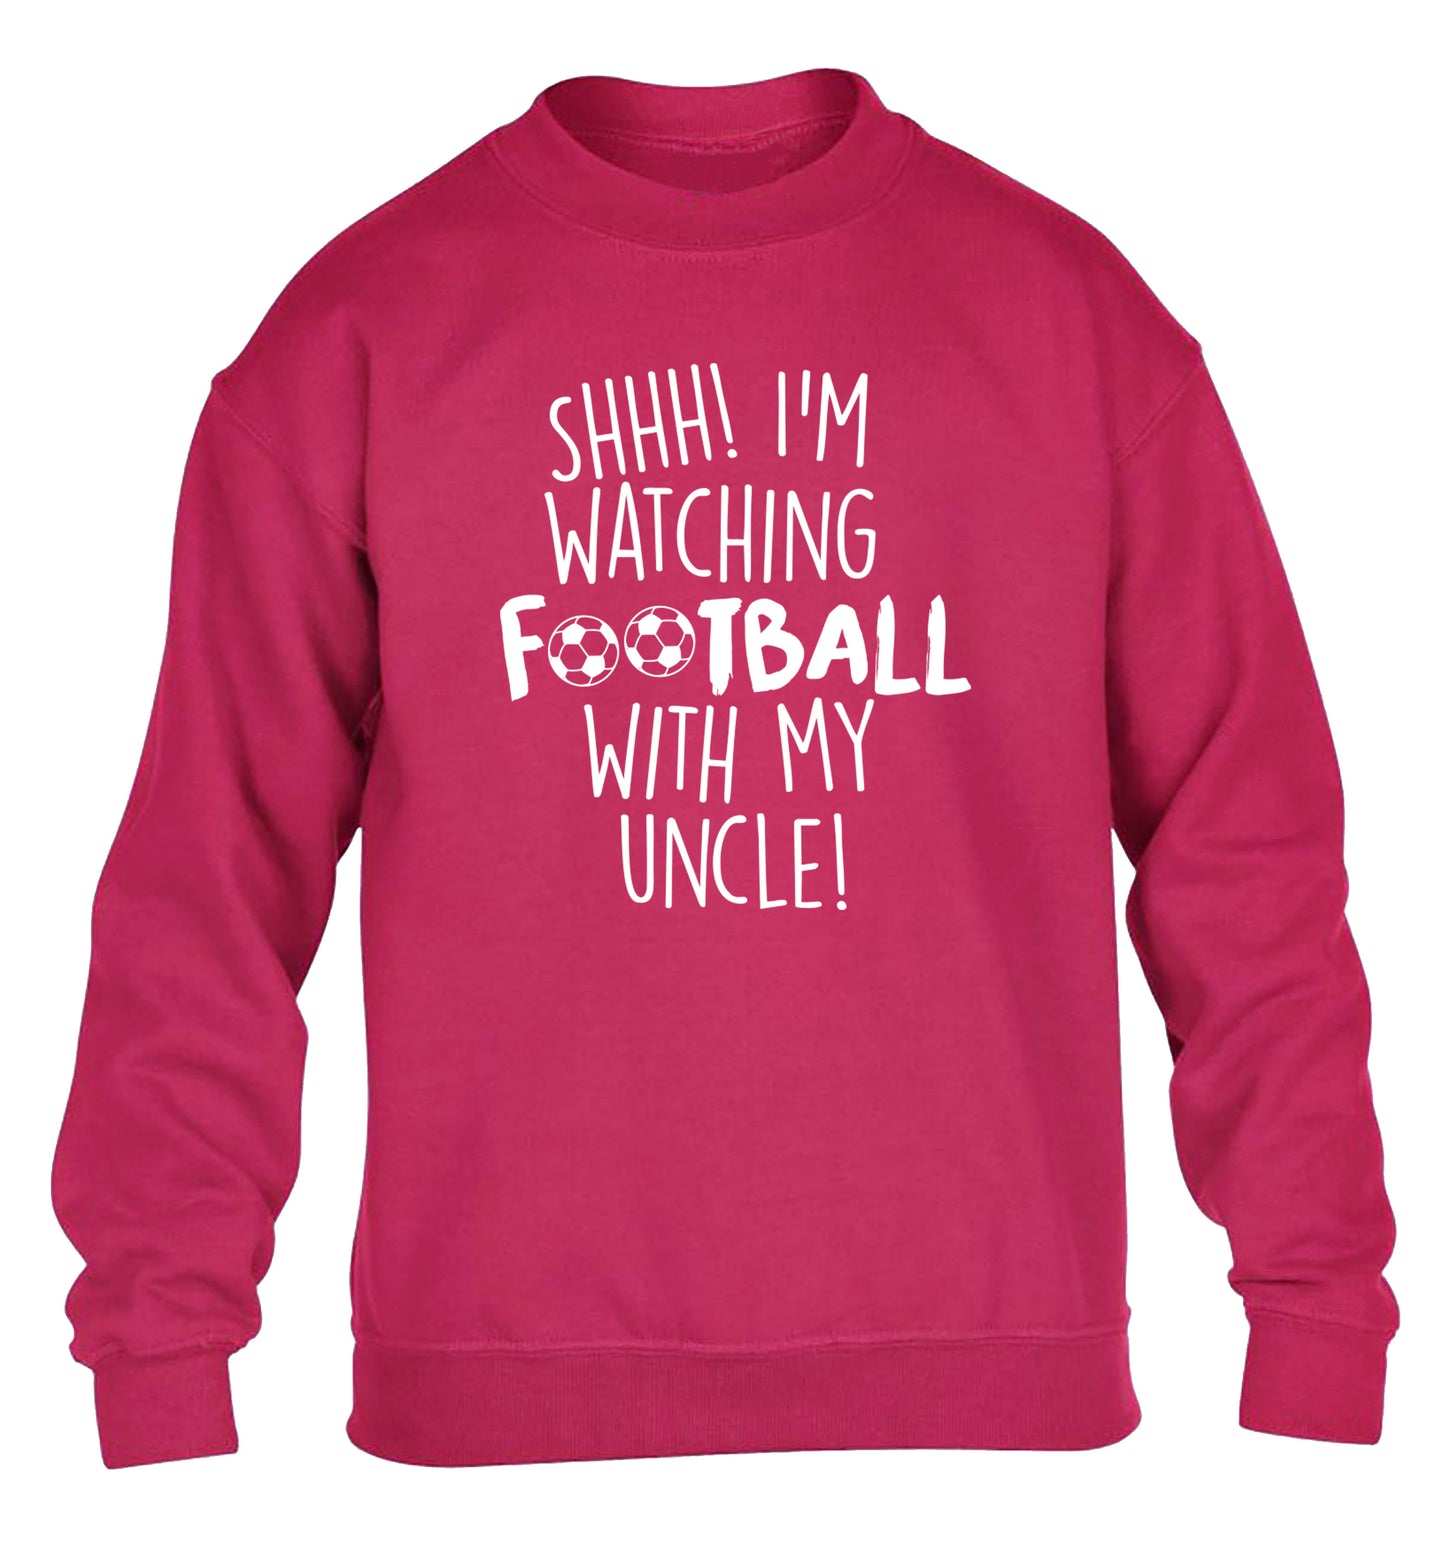 Shhh I'm watching football with my uncle children's pink sweater 12-14 Years